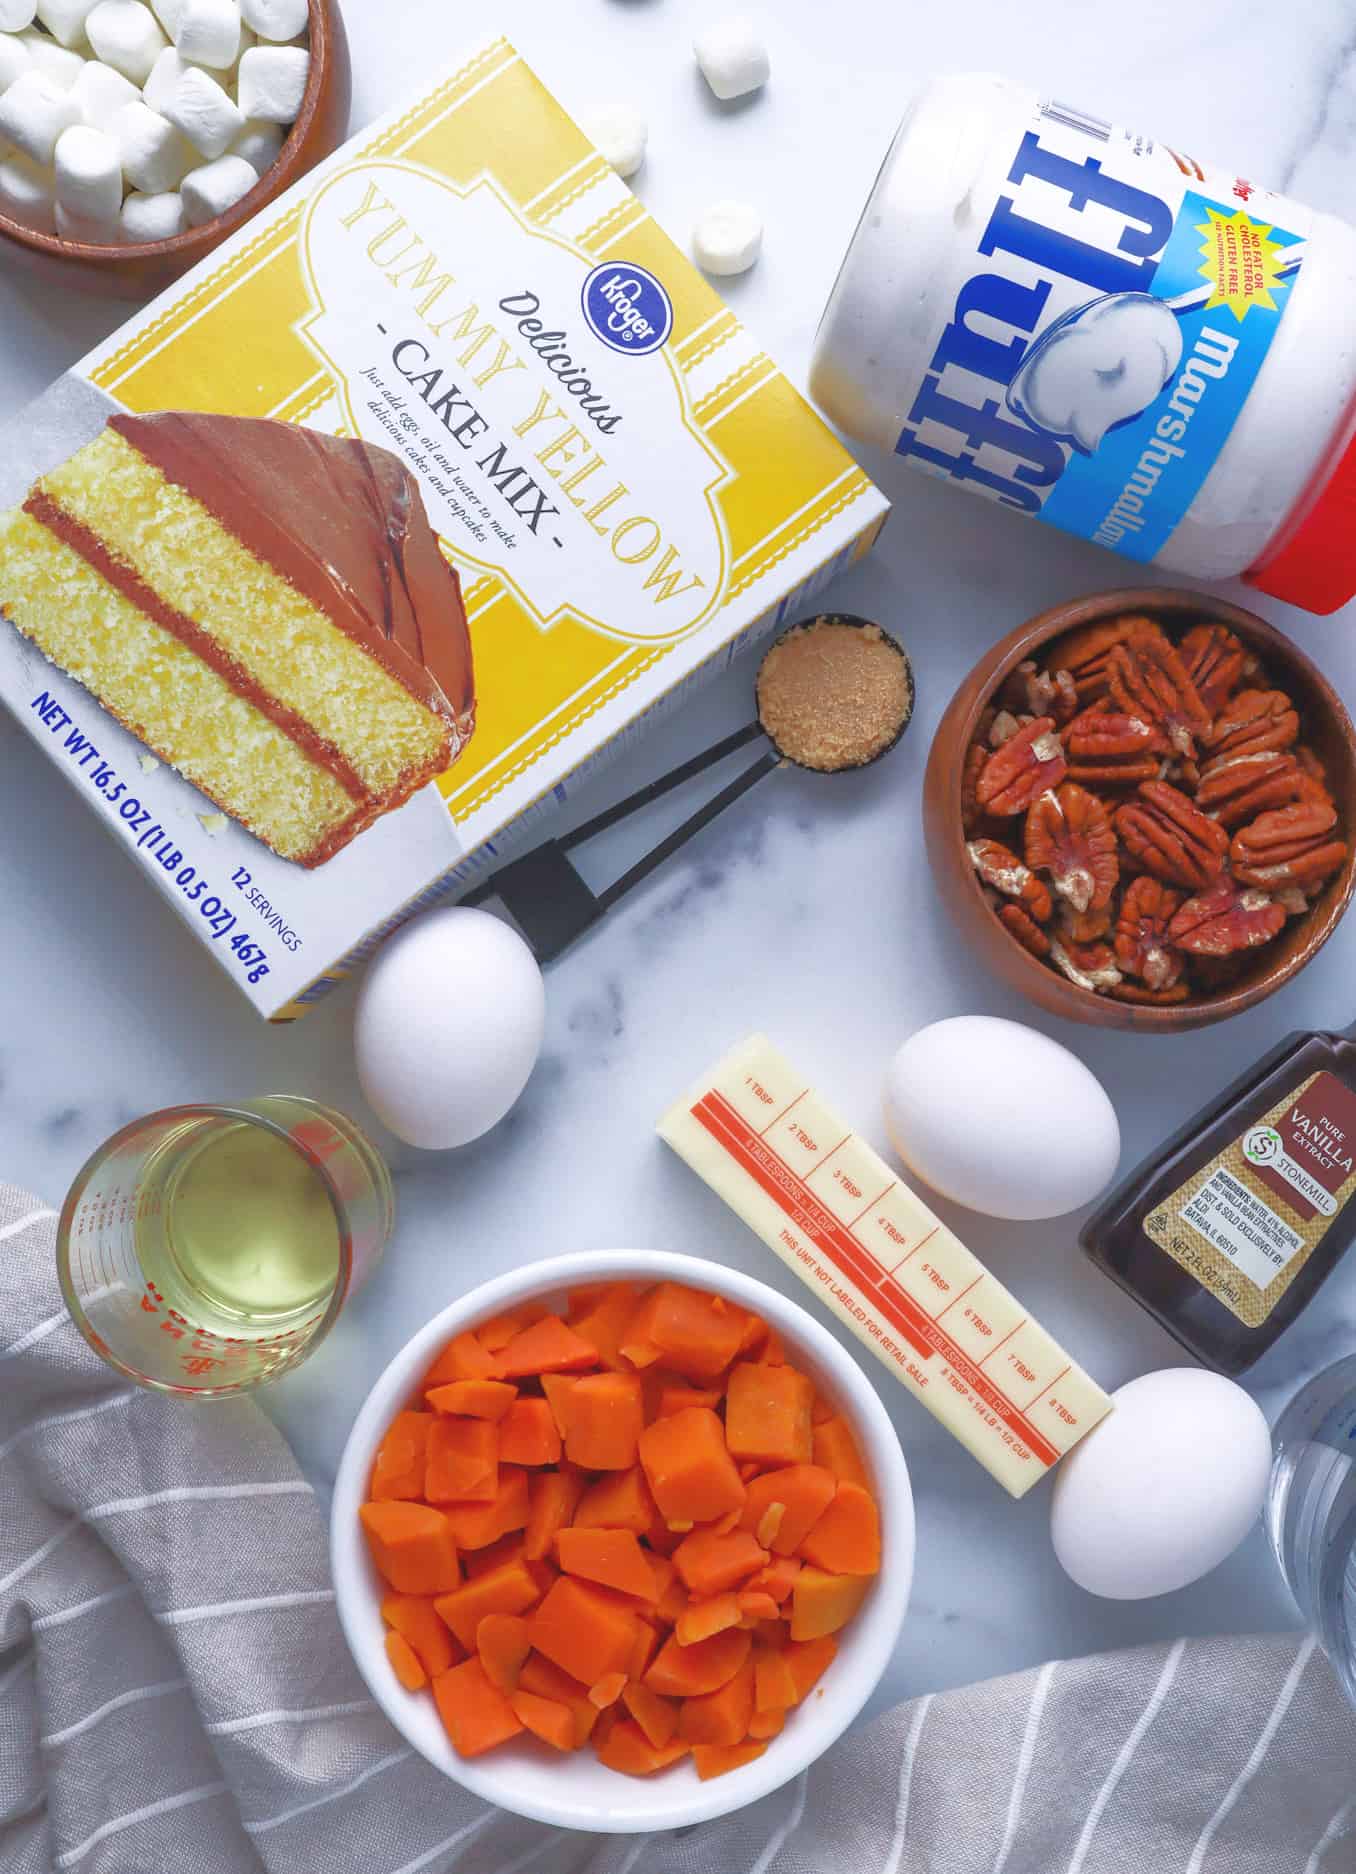 yellow cake mix, vegetable oil, large eggs, water, diced steamable sweet potato, marshmallow fluff, cream cheese ,unsalted butter, light brown sugar, chopped pecans.